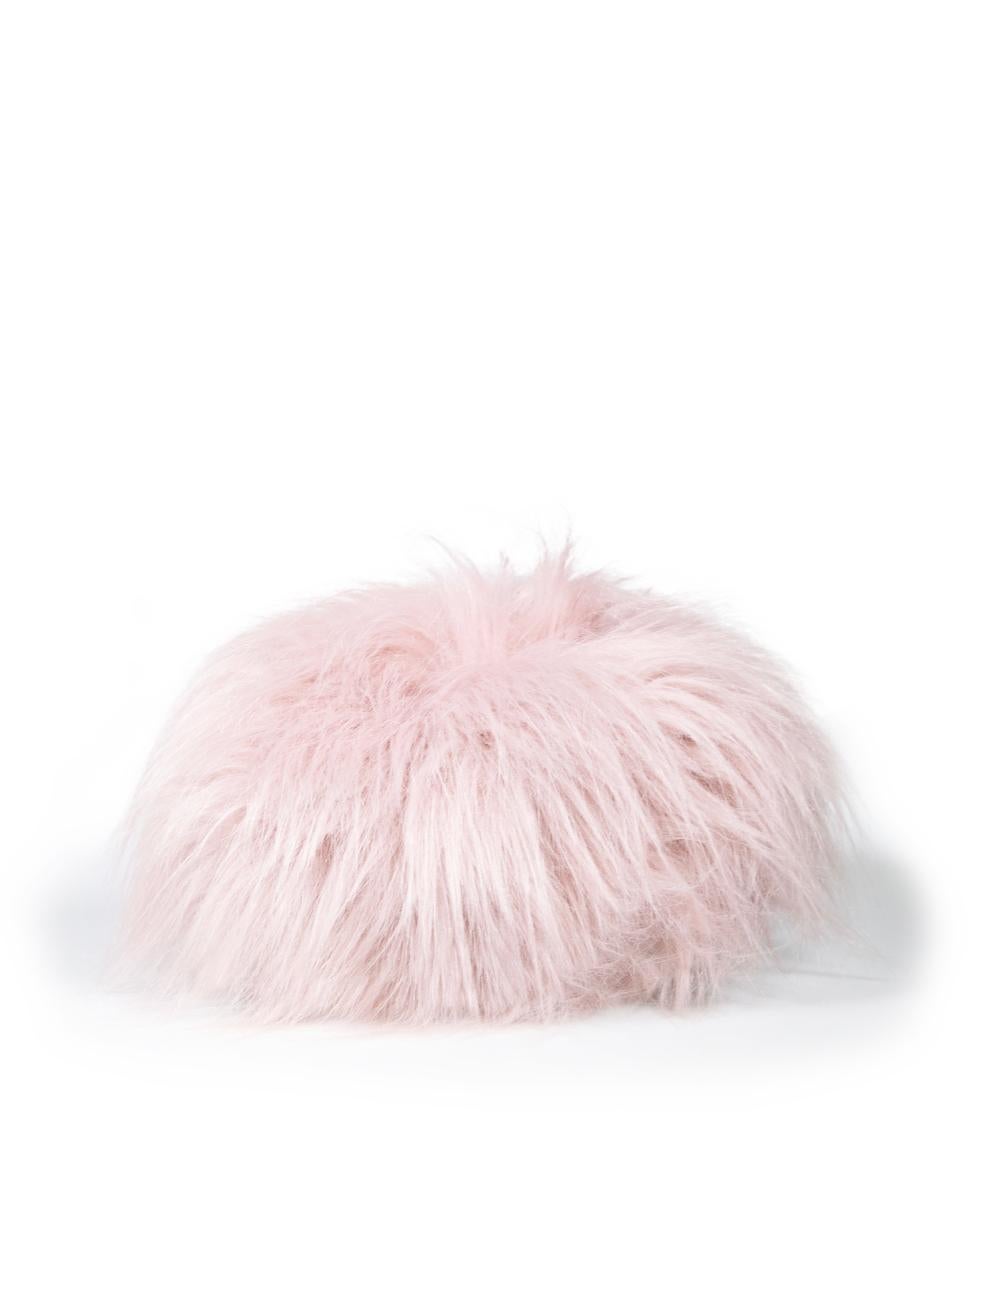 Miu Miu Pink Faux Fur Buckled Cap In Good Condition For Sale In London, GB